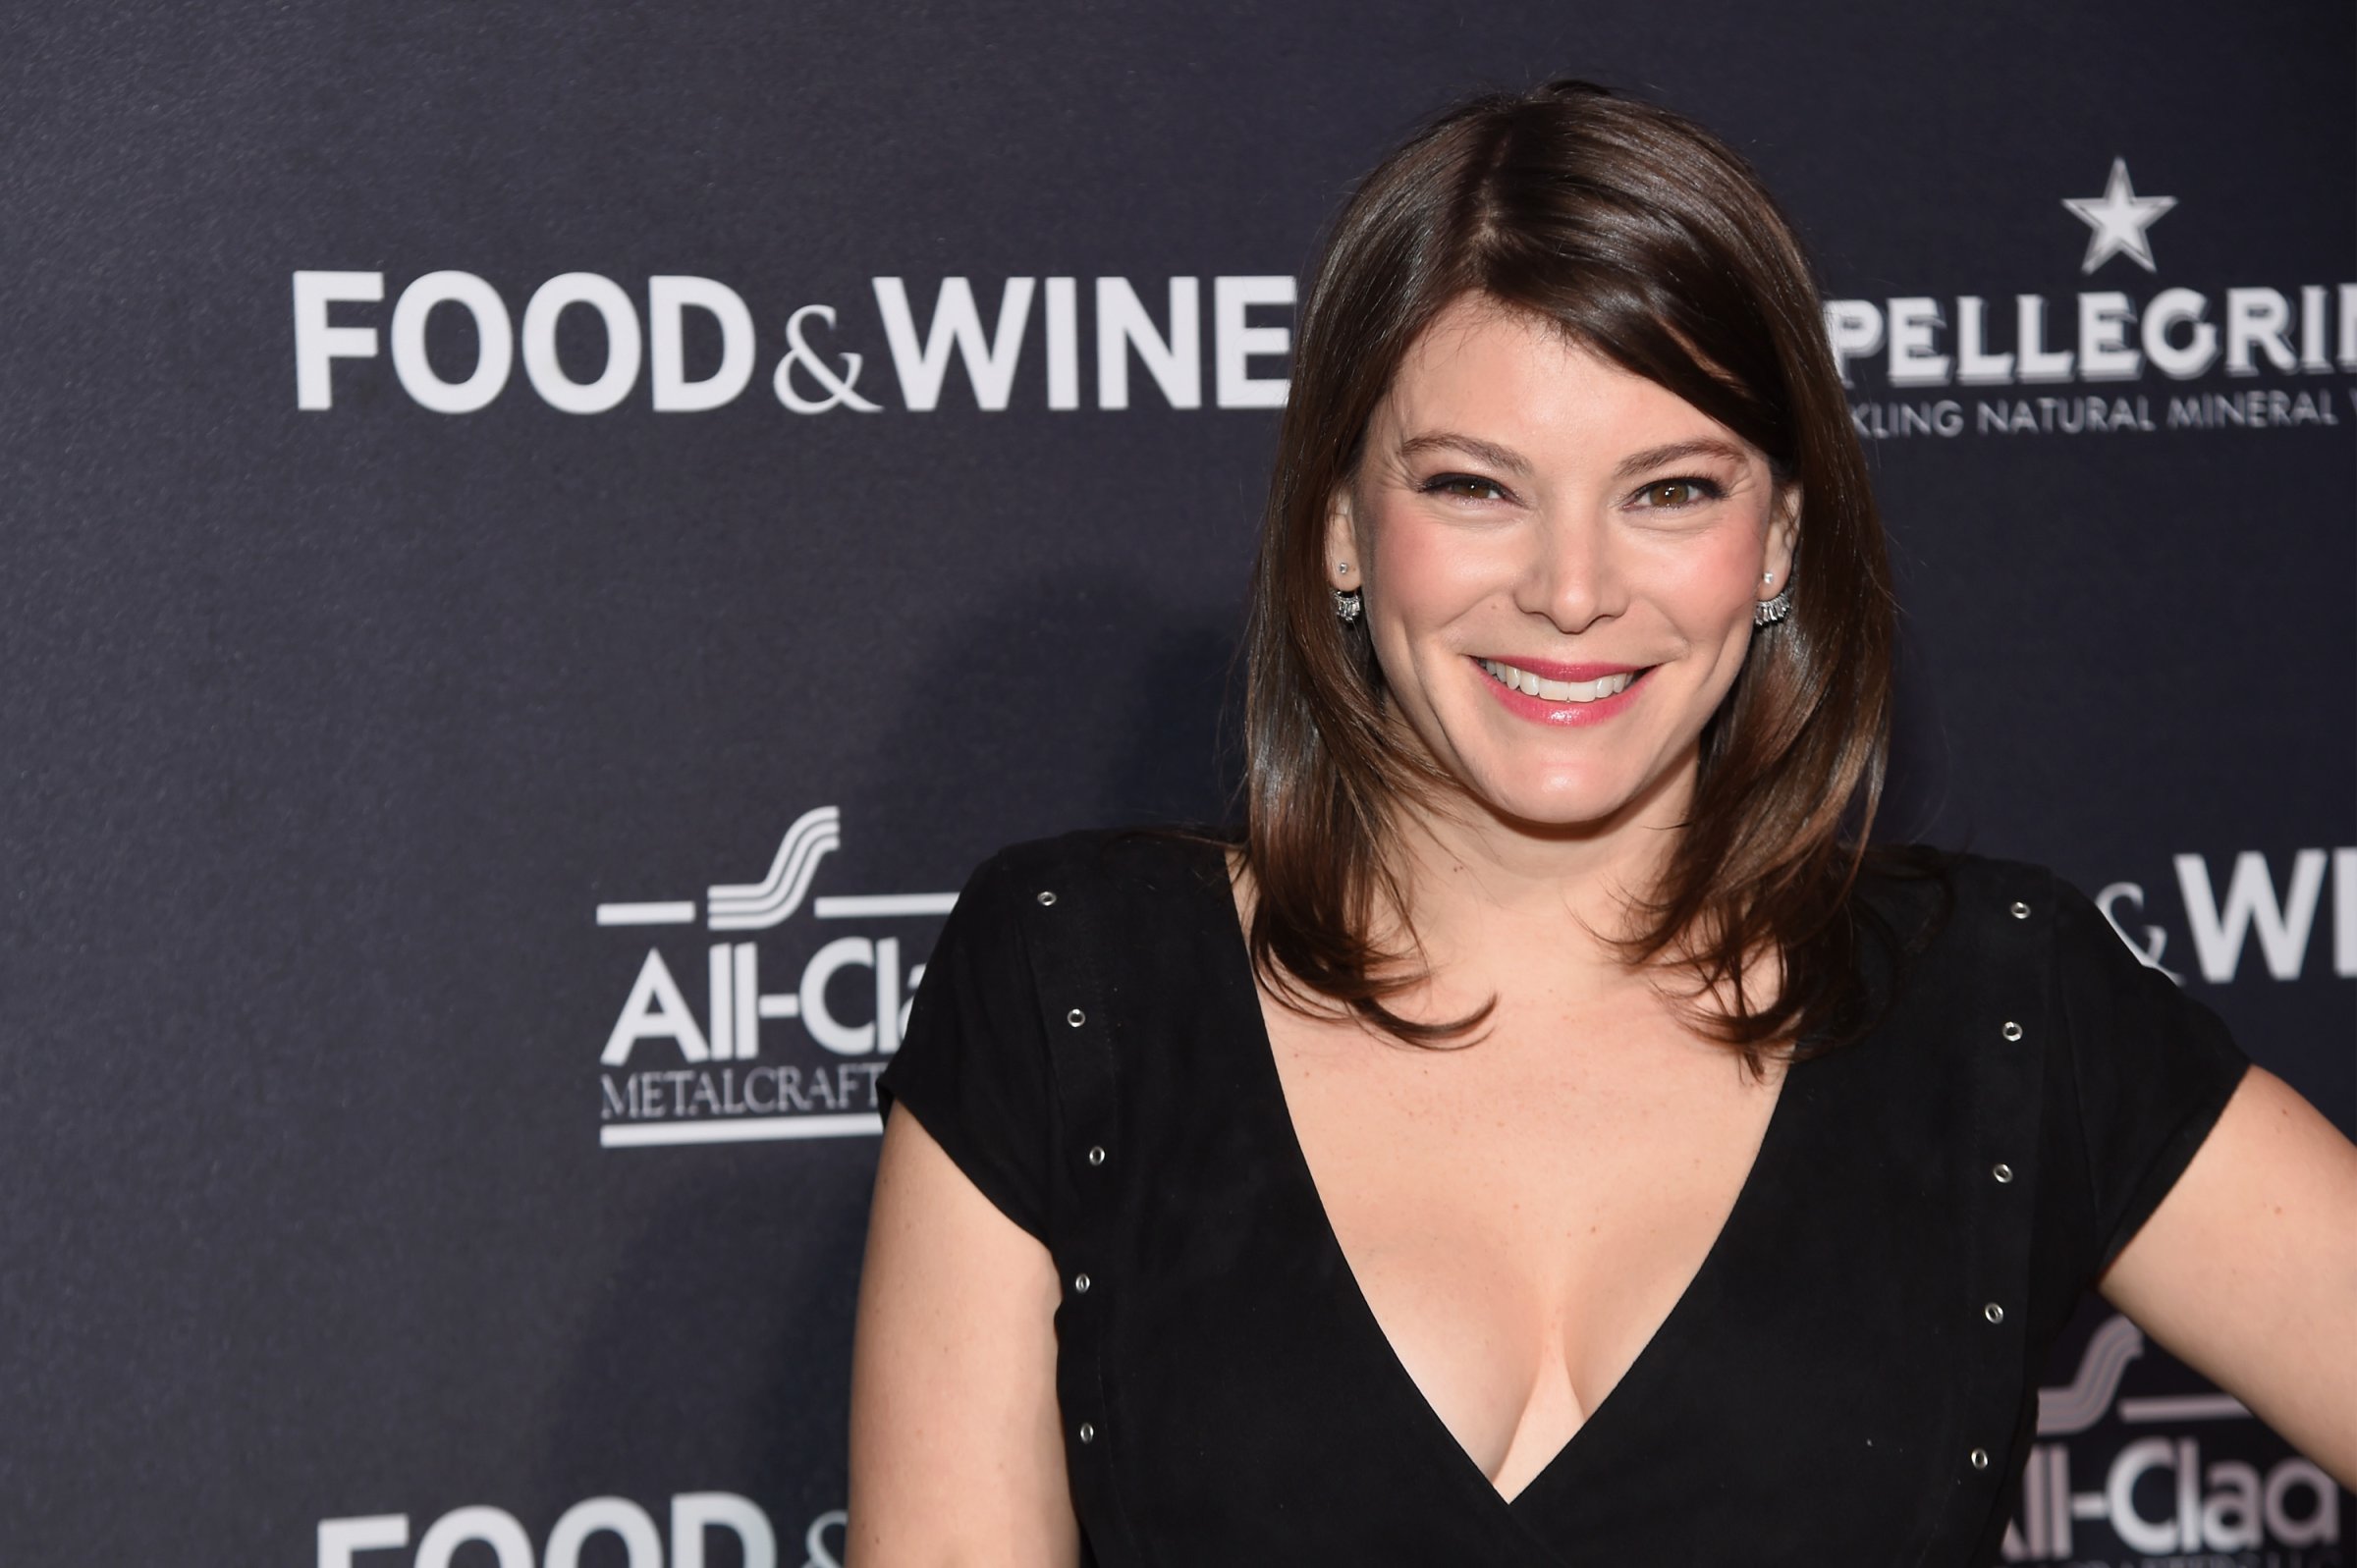 Writer Gail Simmons attends FOOD & WINE 2016 Best New Chefs event on April 5, 2016 in New York City.